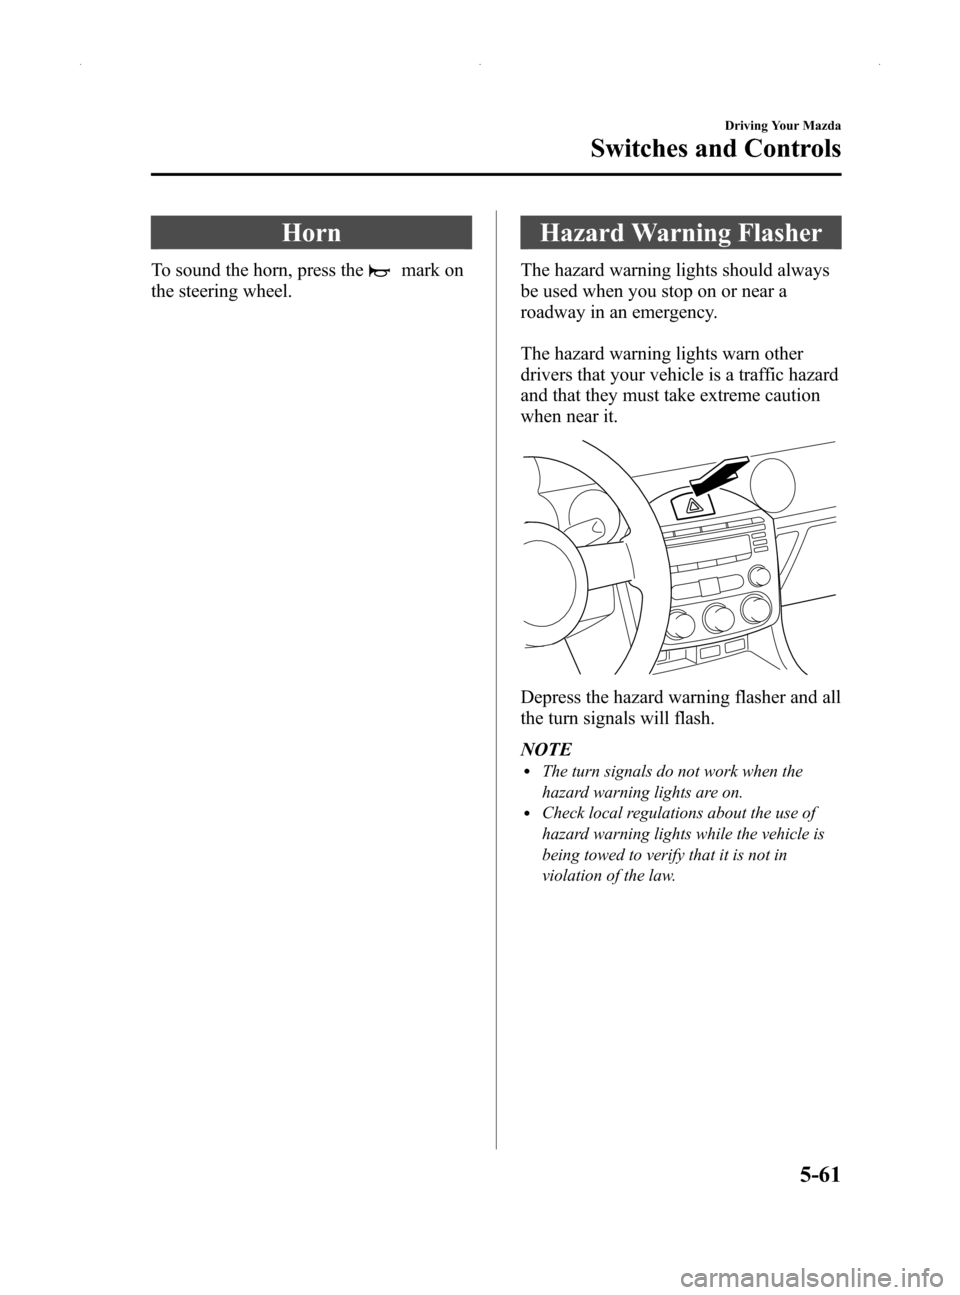 MAZDA MODEL MX-5 2014  Owners Manual (in English) Black plate (205,1)
Horn
To sound the horn, press themark on
the steering wheel.
Hazard Warning Flasher
The hazard warning lights should always
be used when you stop on or near a
roadway in an emergen